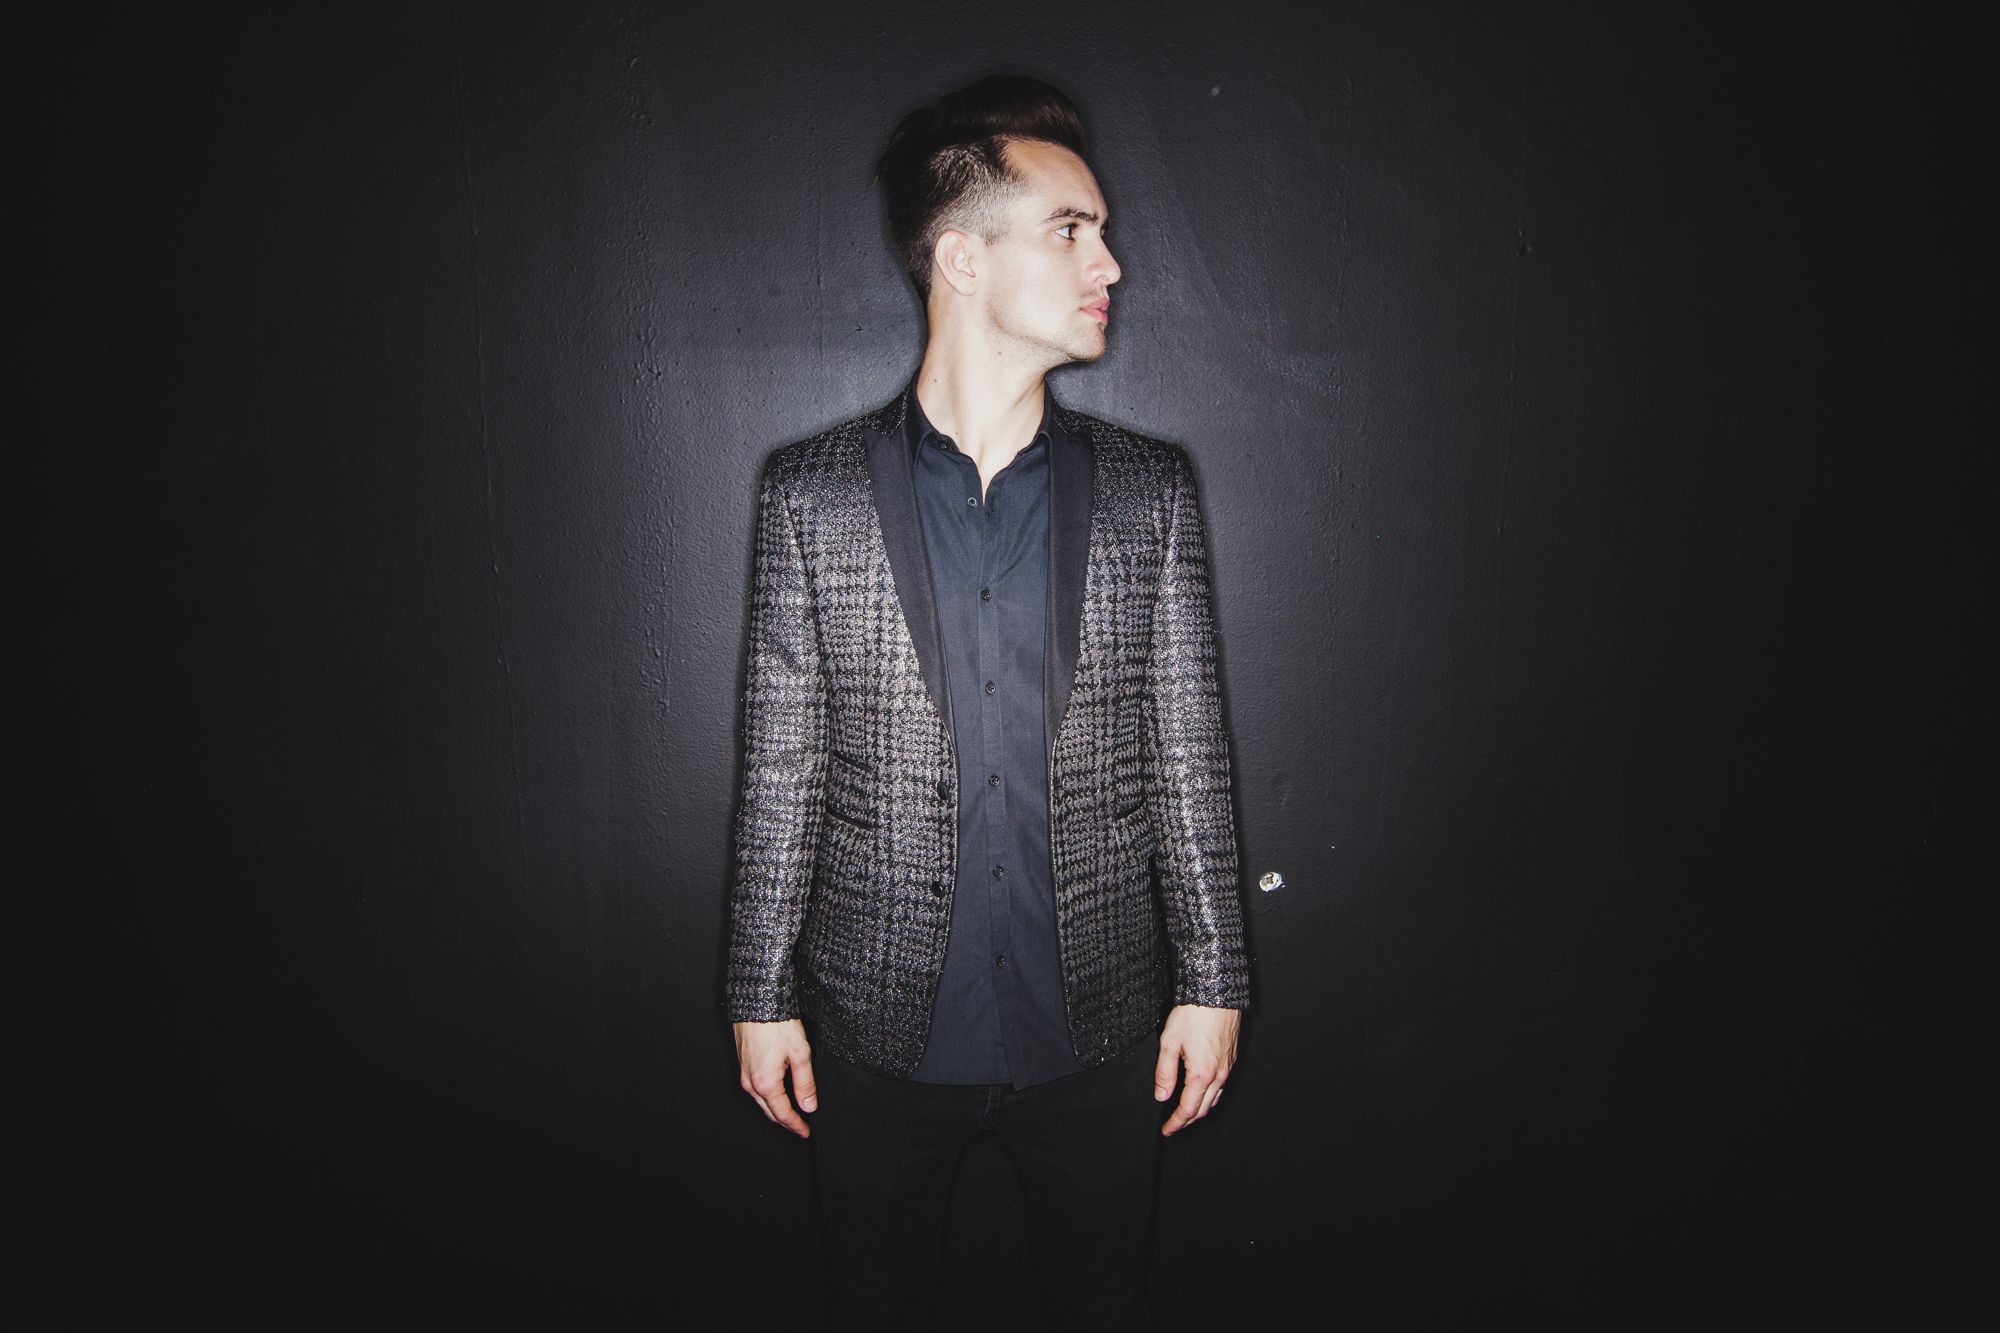 Panic! At The Disco teast nummers